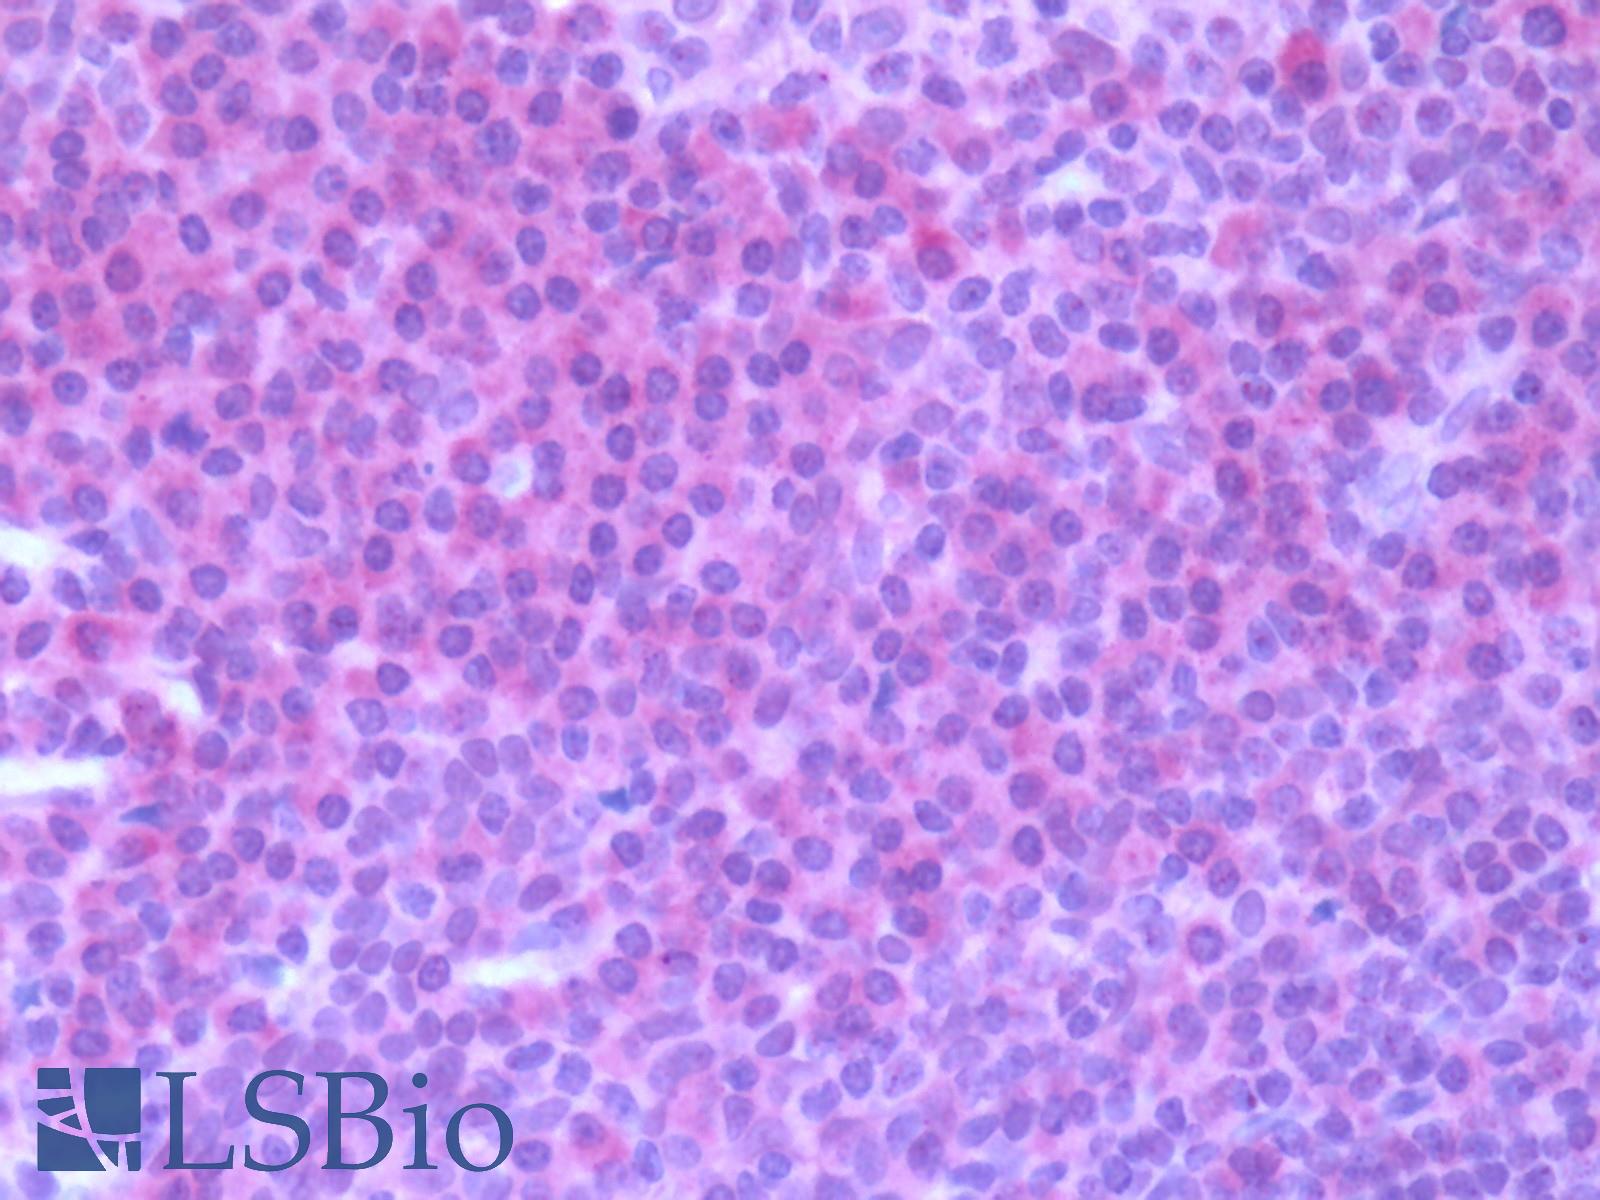 CCR7 Antibody - Human Tonsil: Formalin-Fixed, Paraffin-Embedded (FFPE)